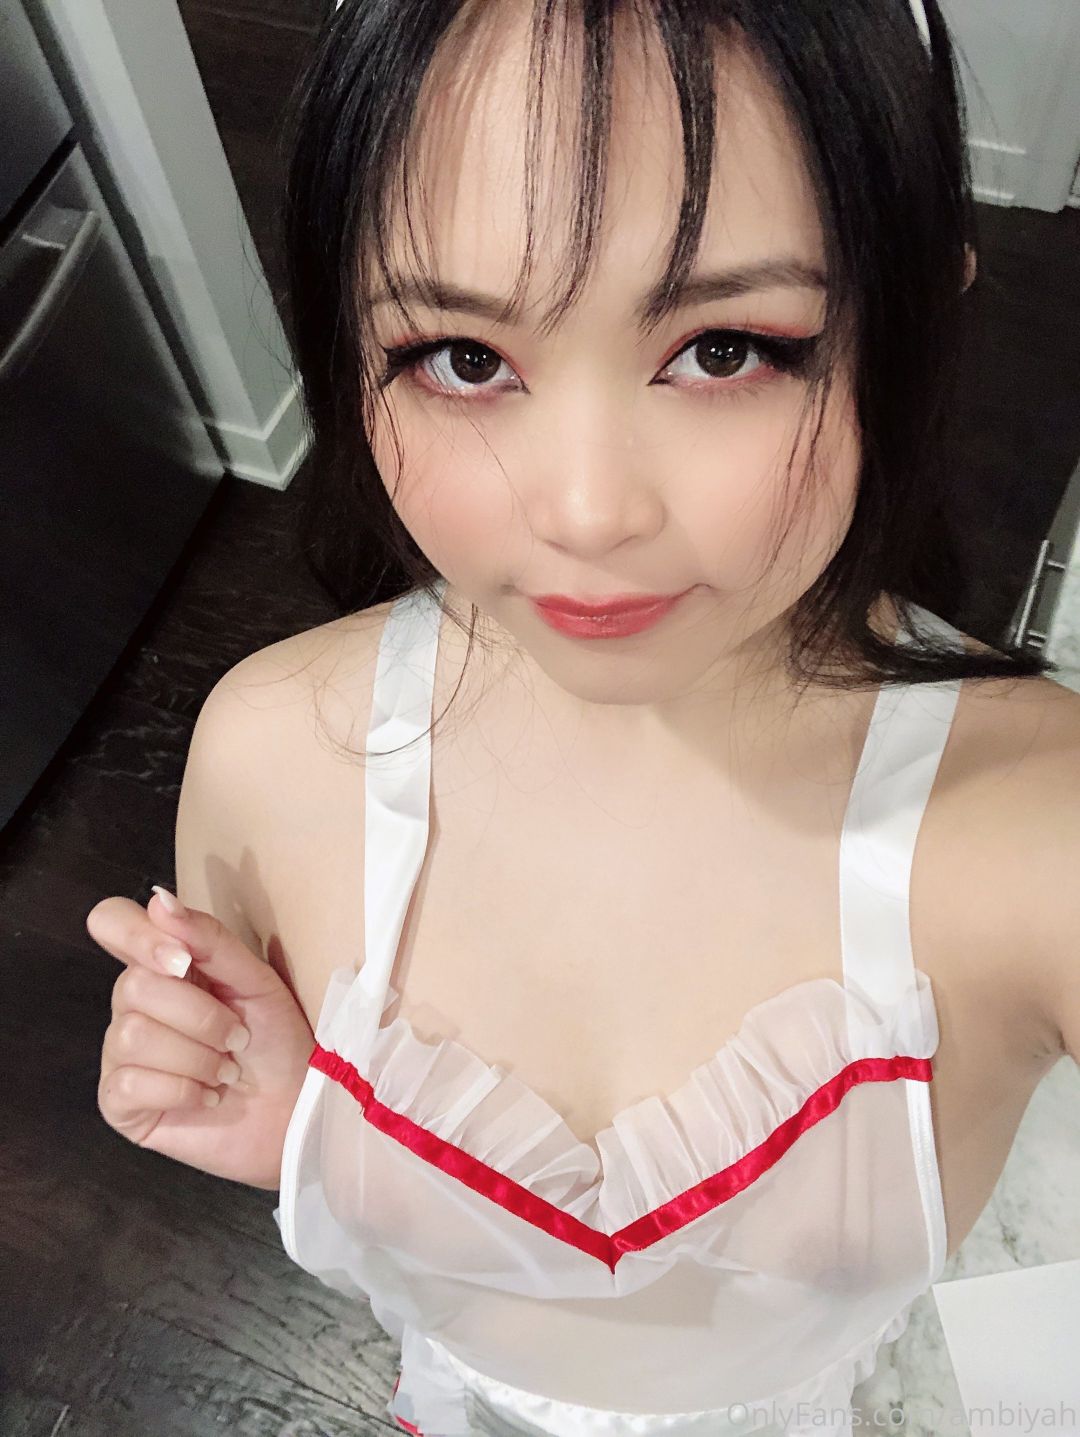 AsianOnlyfans 72 080 917 20220225